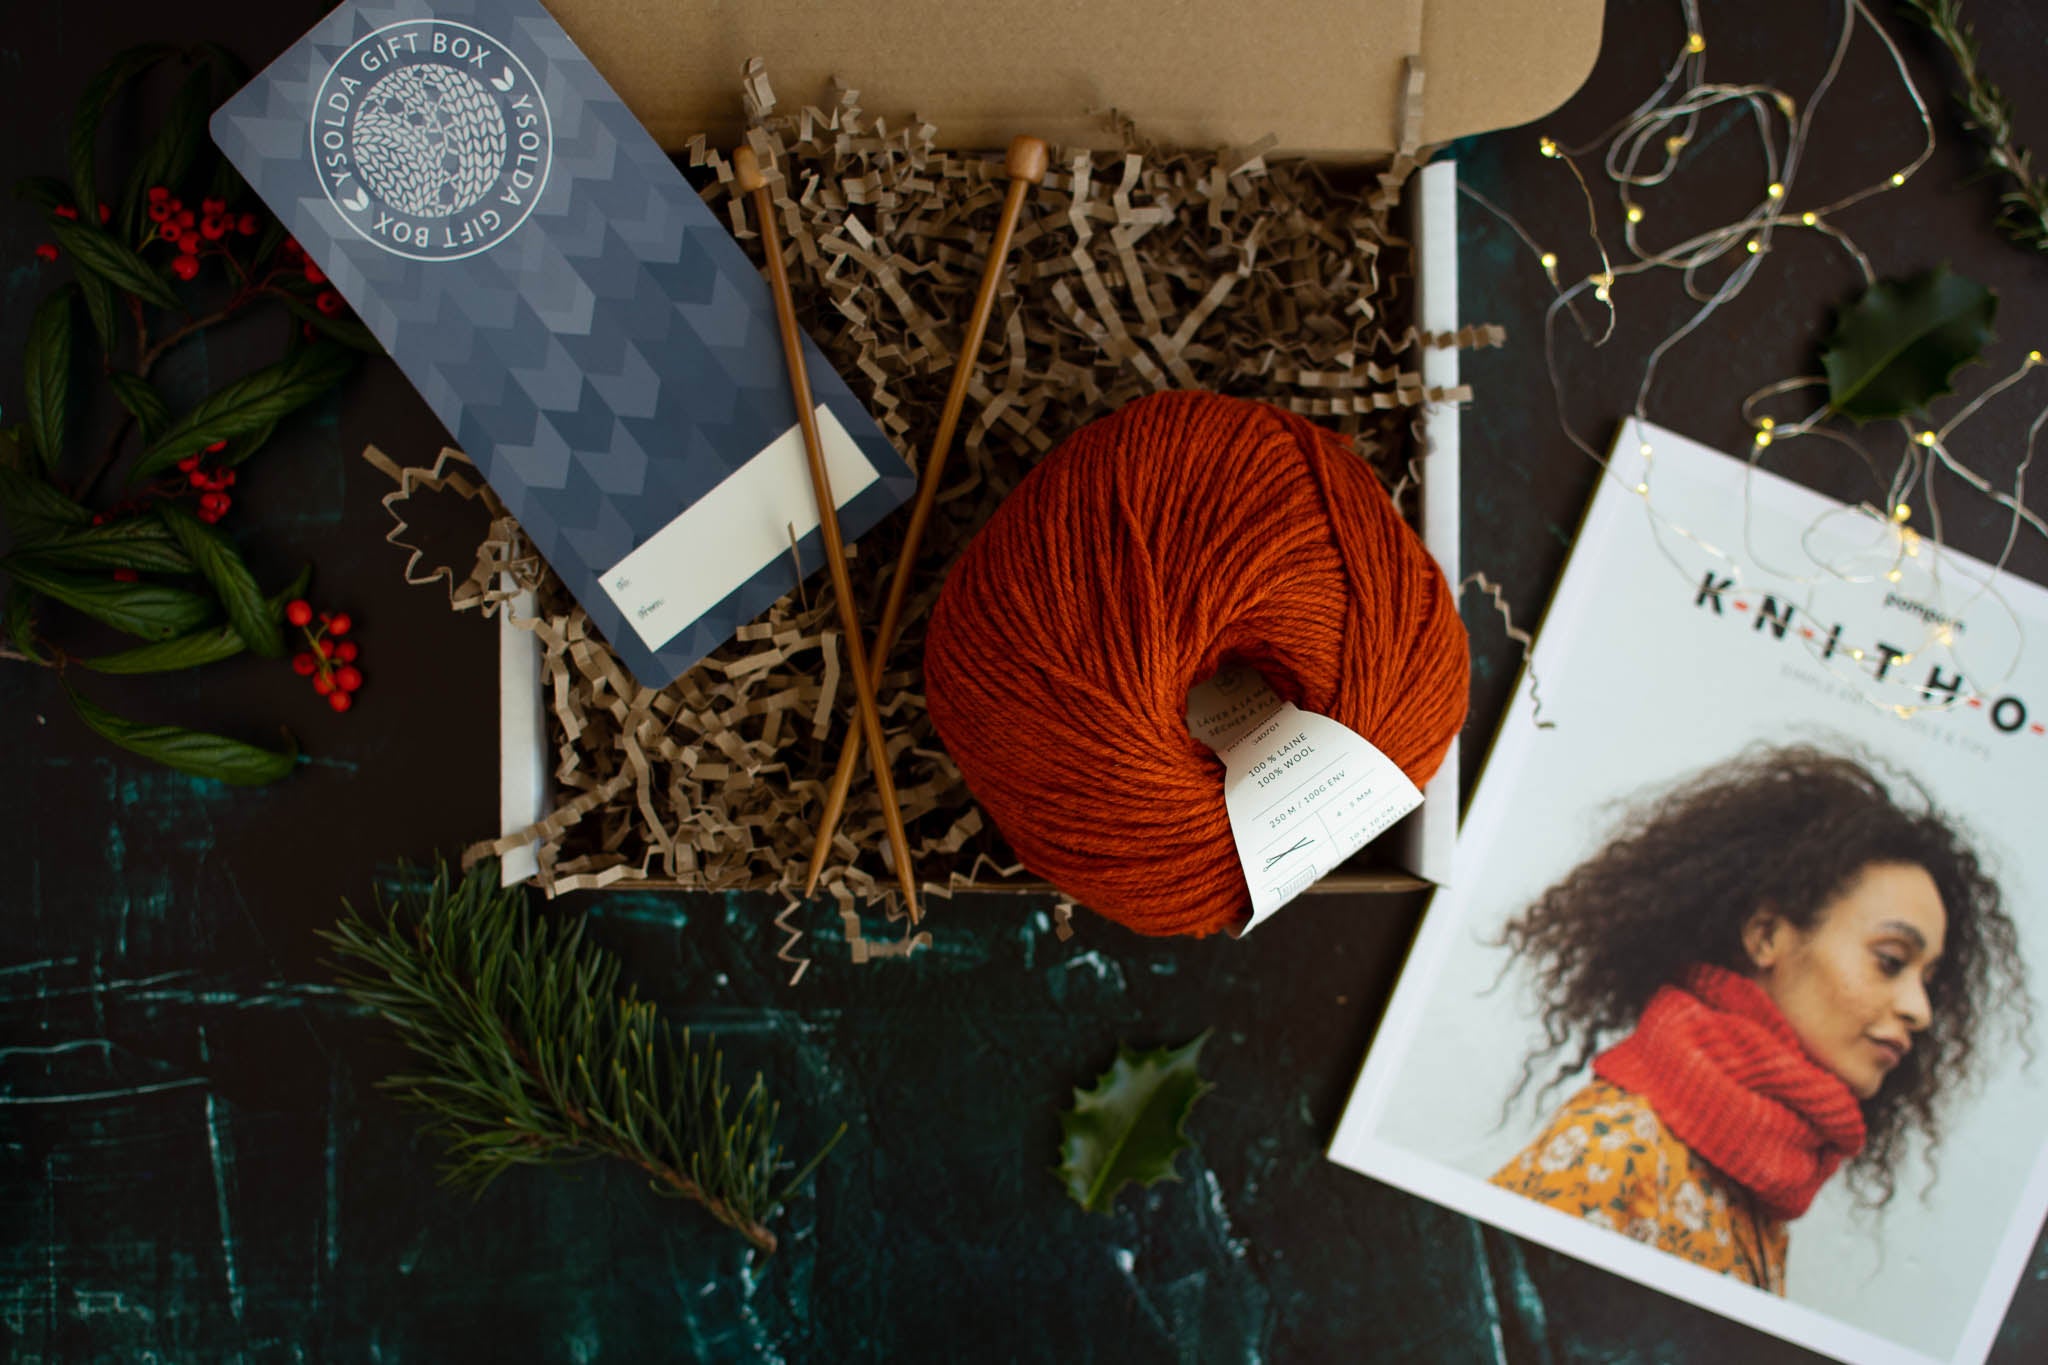 An open box containing a pair of bamboo knitting needles, a red ball of wool and book called Knit How with a black woman wearing a red cowl on the cover.